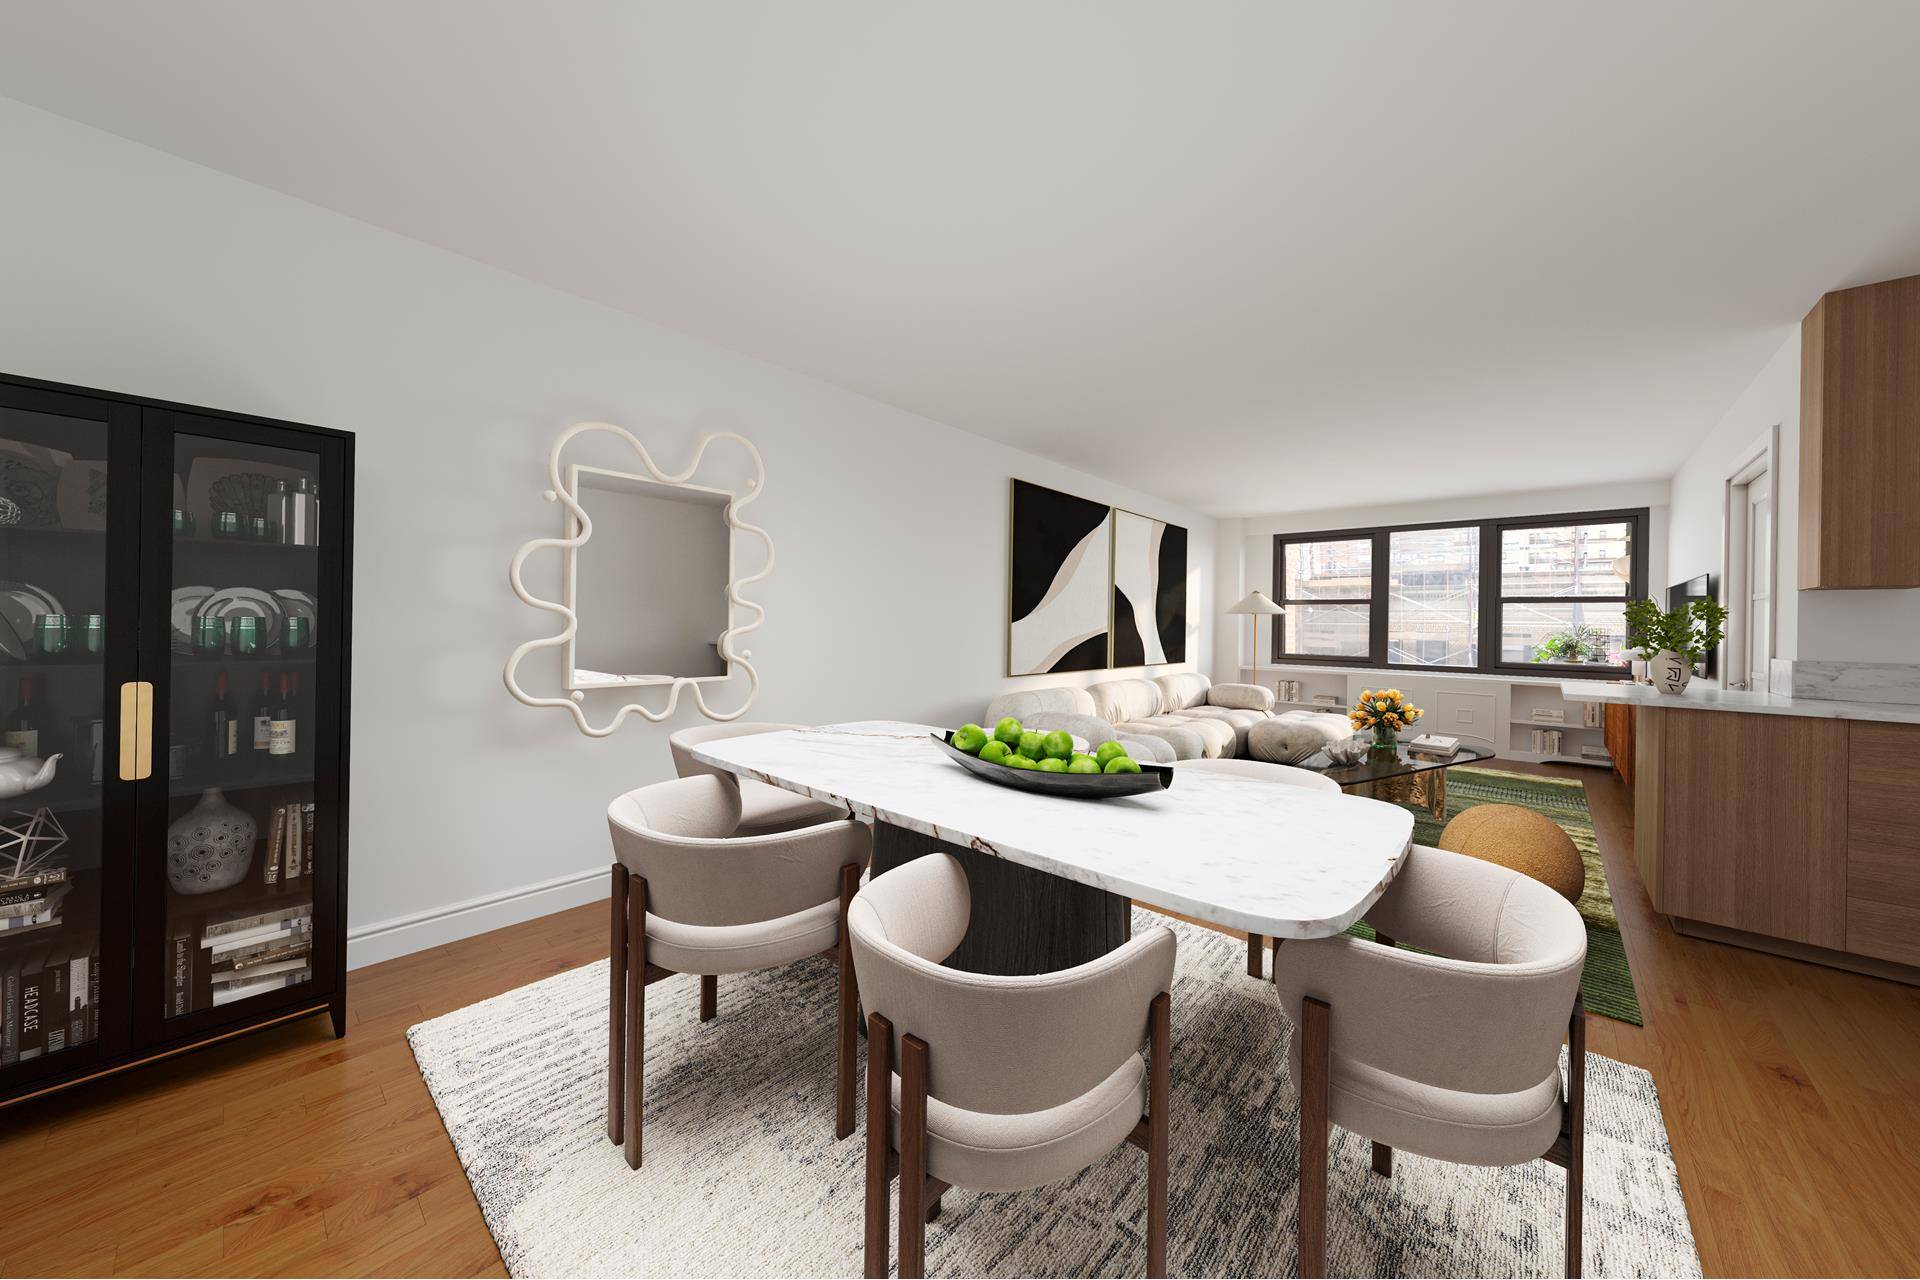 Welcome to 200 East 27th Street, an exceptional two bedroom residence in excellent condition boasting stunning Empire State views.